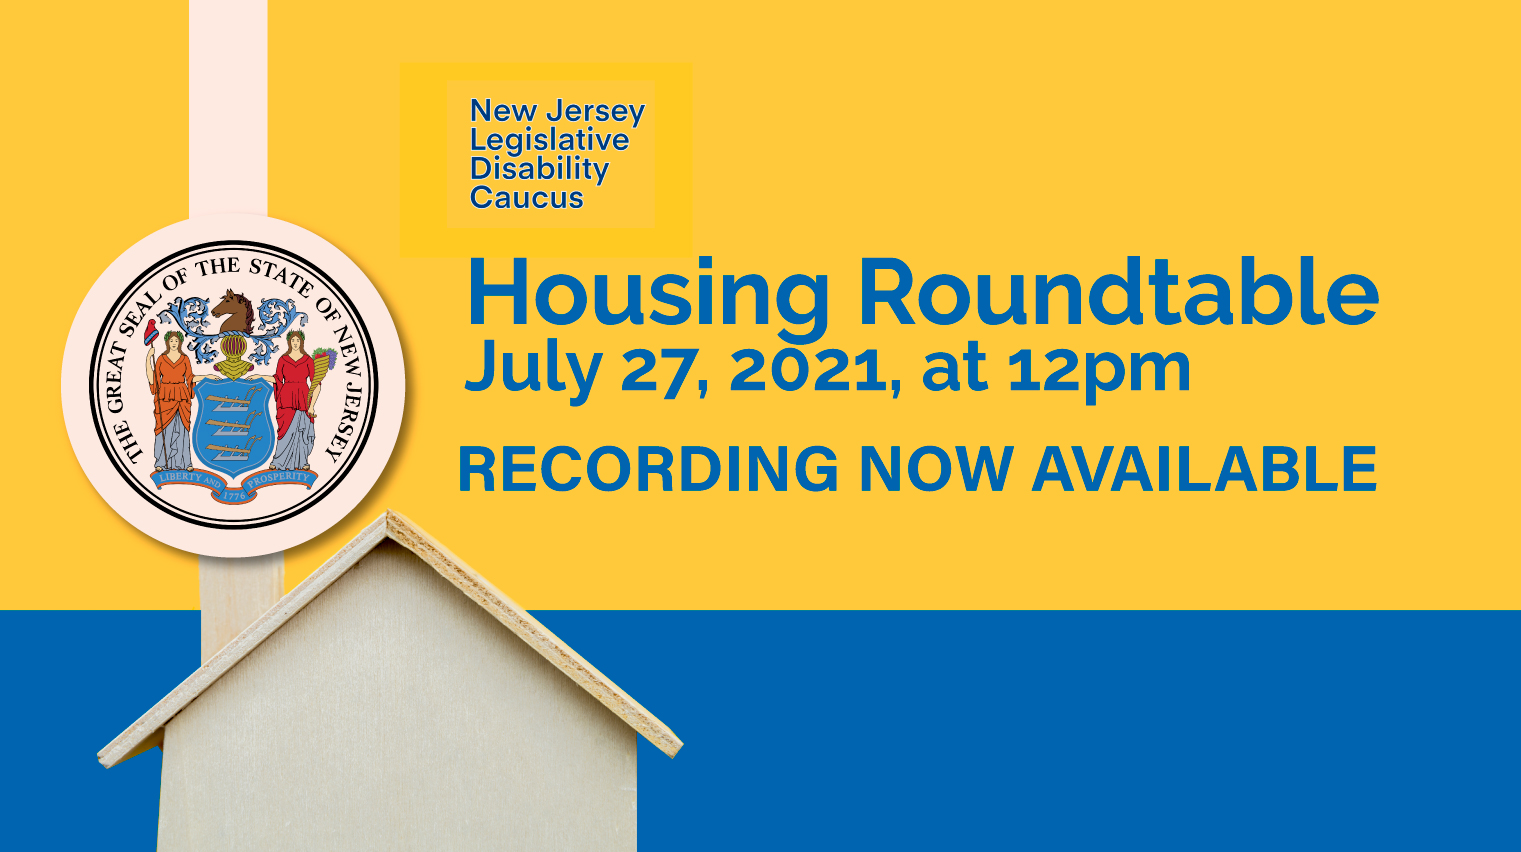 NJDisabilityCaucus-Housing-July272021-Recording Now Available